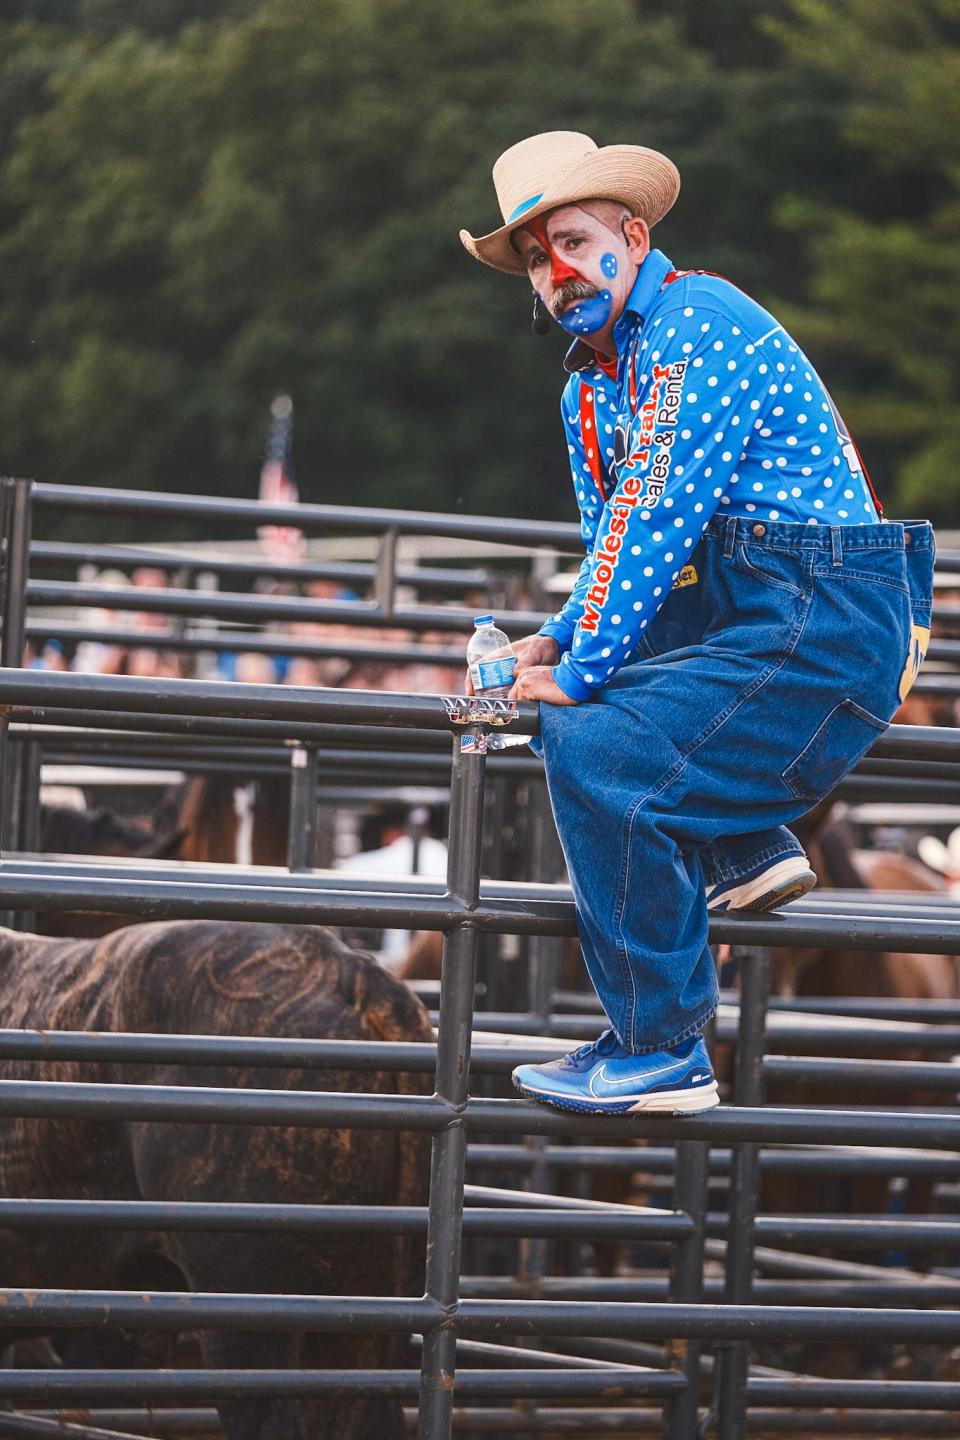 The rodeo clown climbs a fence during multiple comedy skits throughout the night at the Maury County Fair and Rodeo on Thursday, Aug. 31, 2023.